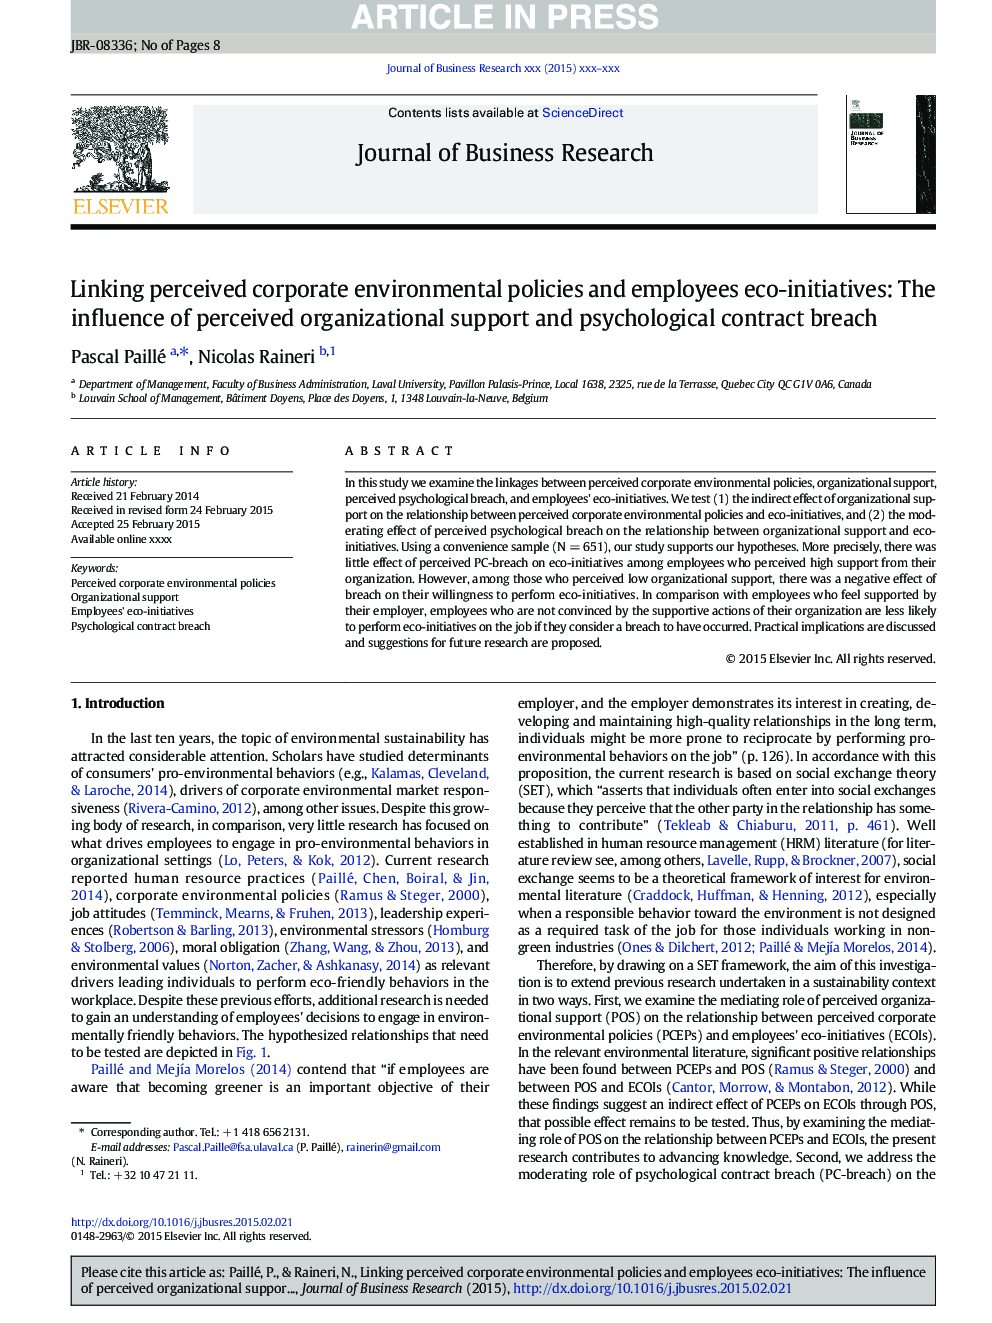 Linking perceived corporate environmental policies and employees eco-initiatives: The influence of perceived organizational support and psychological contract breach